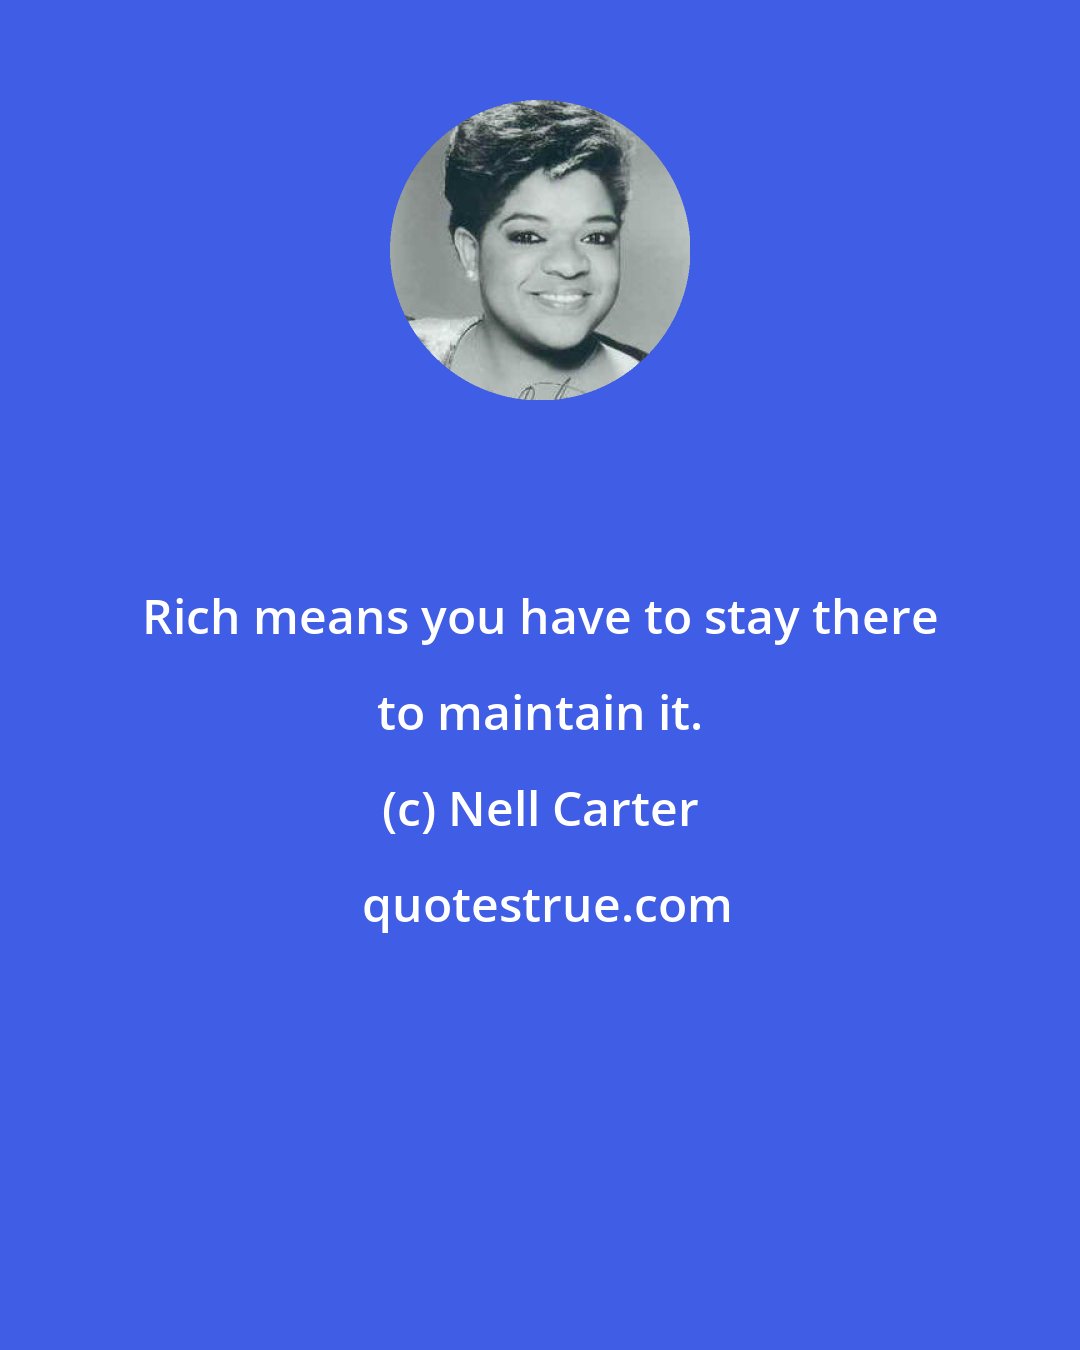 Nell Carter: Rich means you have to stay there to maintain it.